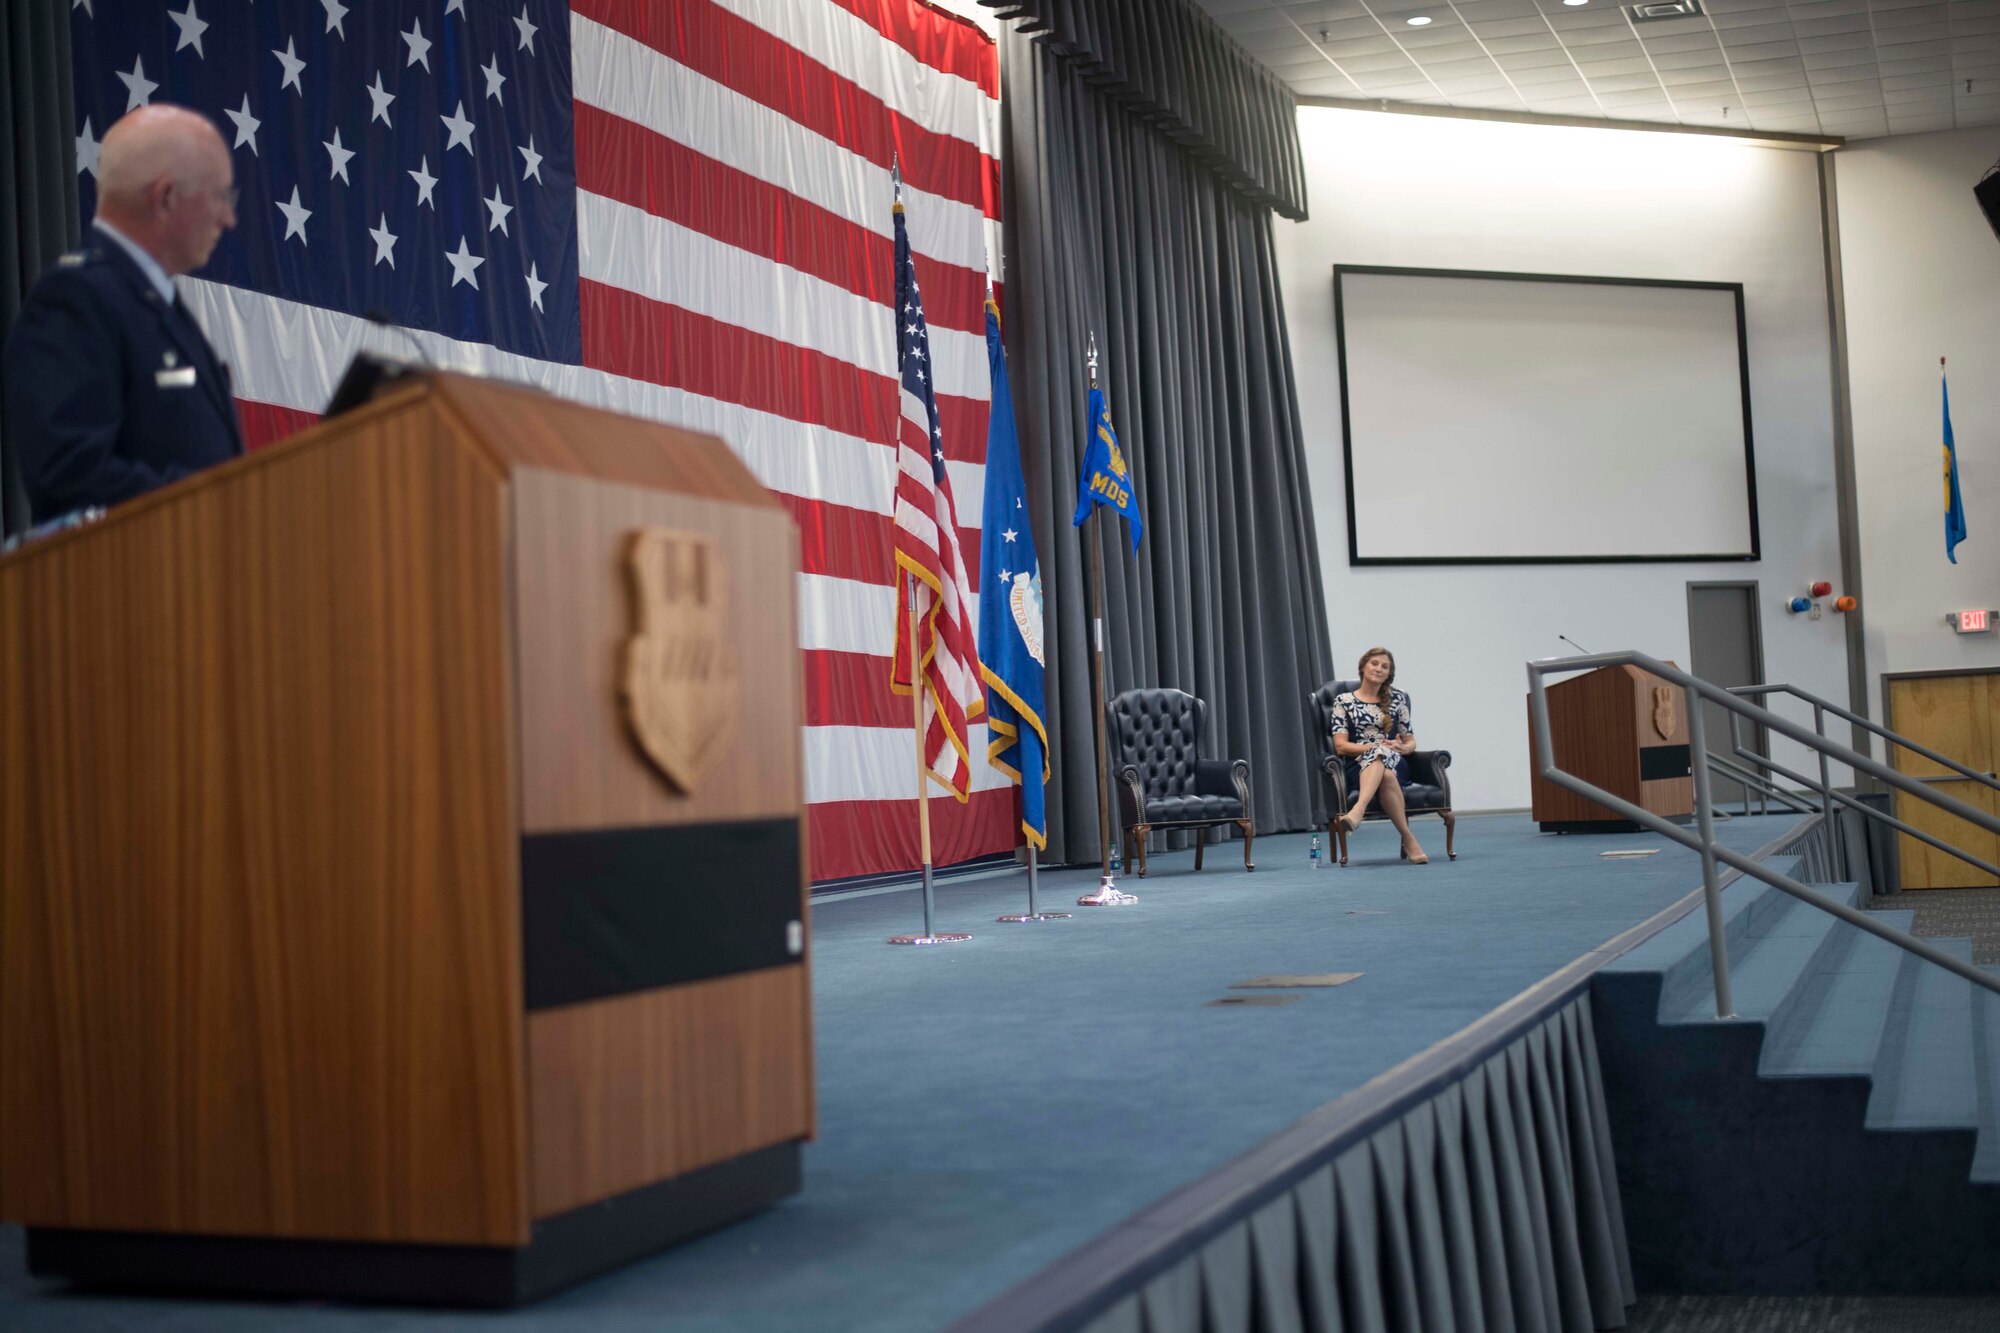 Dr. Tess VanHoy, 307th Medical Squadron honorary commander, looks on as Col. Louis Fehl, 307th MDS commander, speaks during an induction ceremony at Barksdale Air Force Base, Louisiana, Dec. 1, 2018.  VanHoy became the first honorary commander of the unit during the induction ceremony.  She is a medical doctor with several years of experience and is the spouse of Col. Rober VanHoy, 307th Bomb Wing commander. (U.S. Air Force photo by Master Sgt. Ted Daigle)